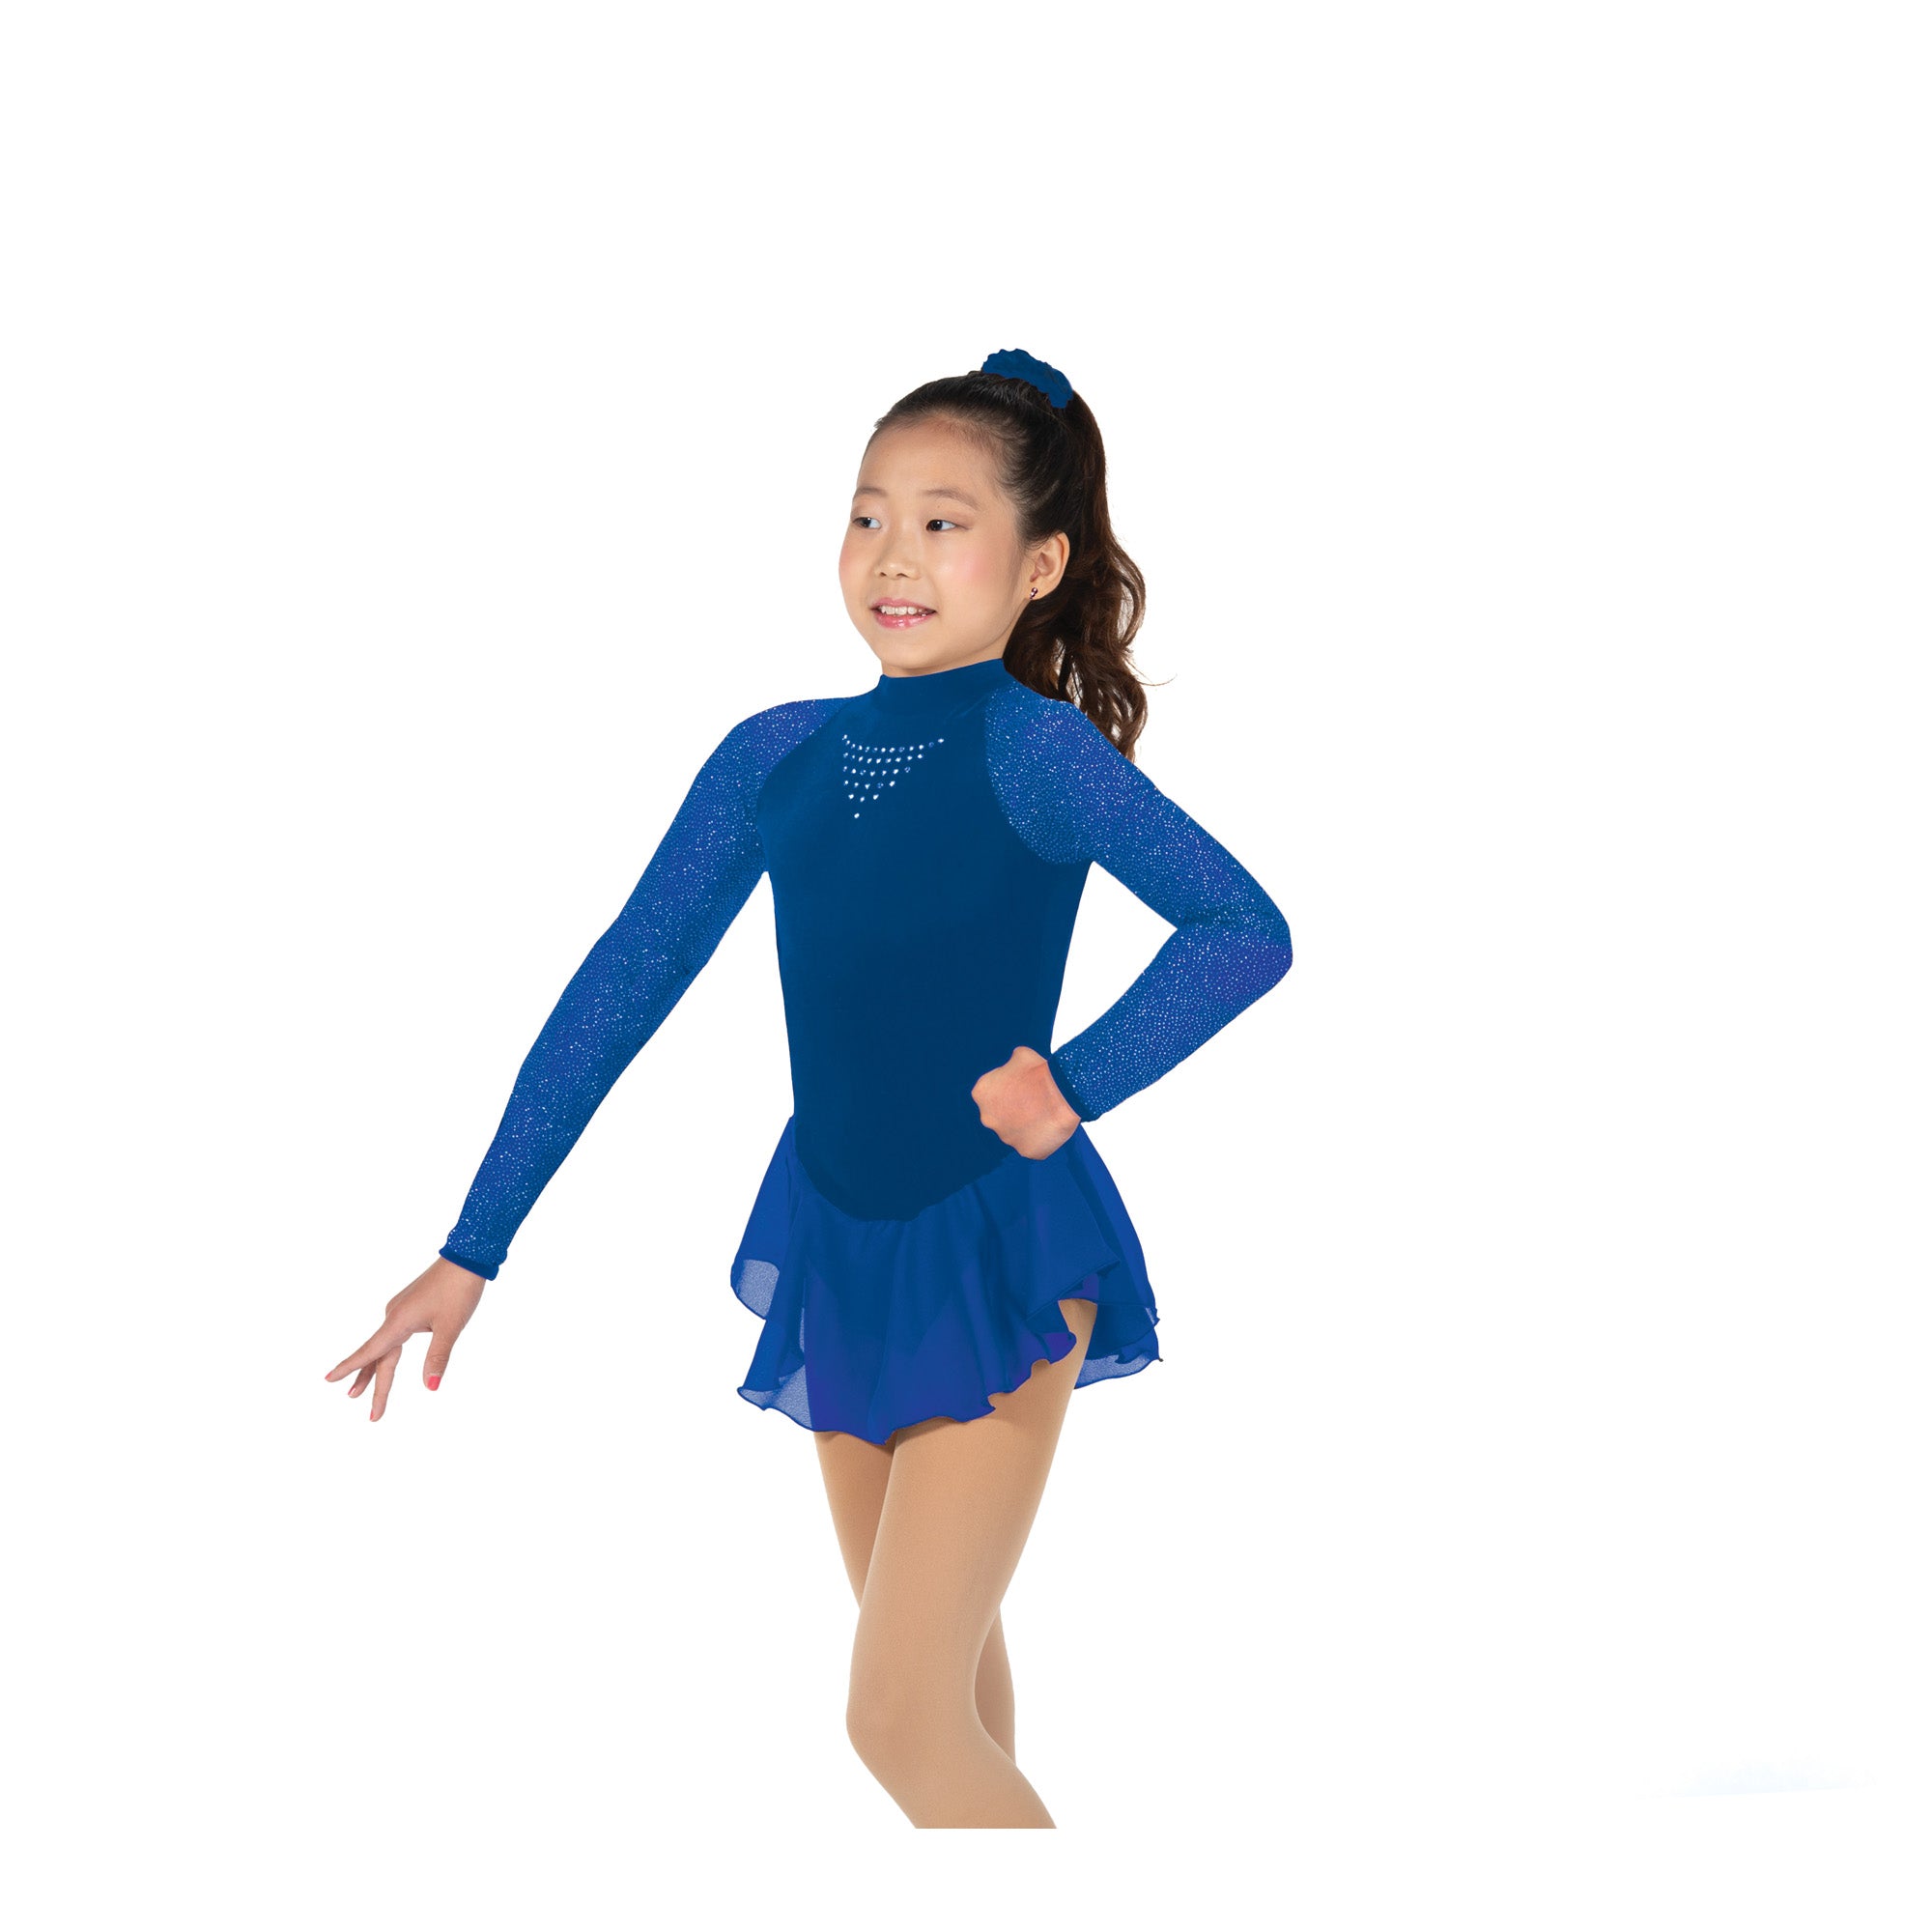 646 Starbrite Skating Dress in Blue by Jerry's